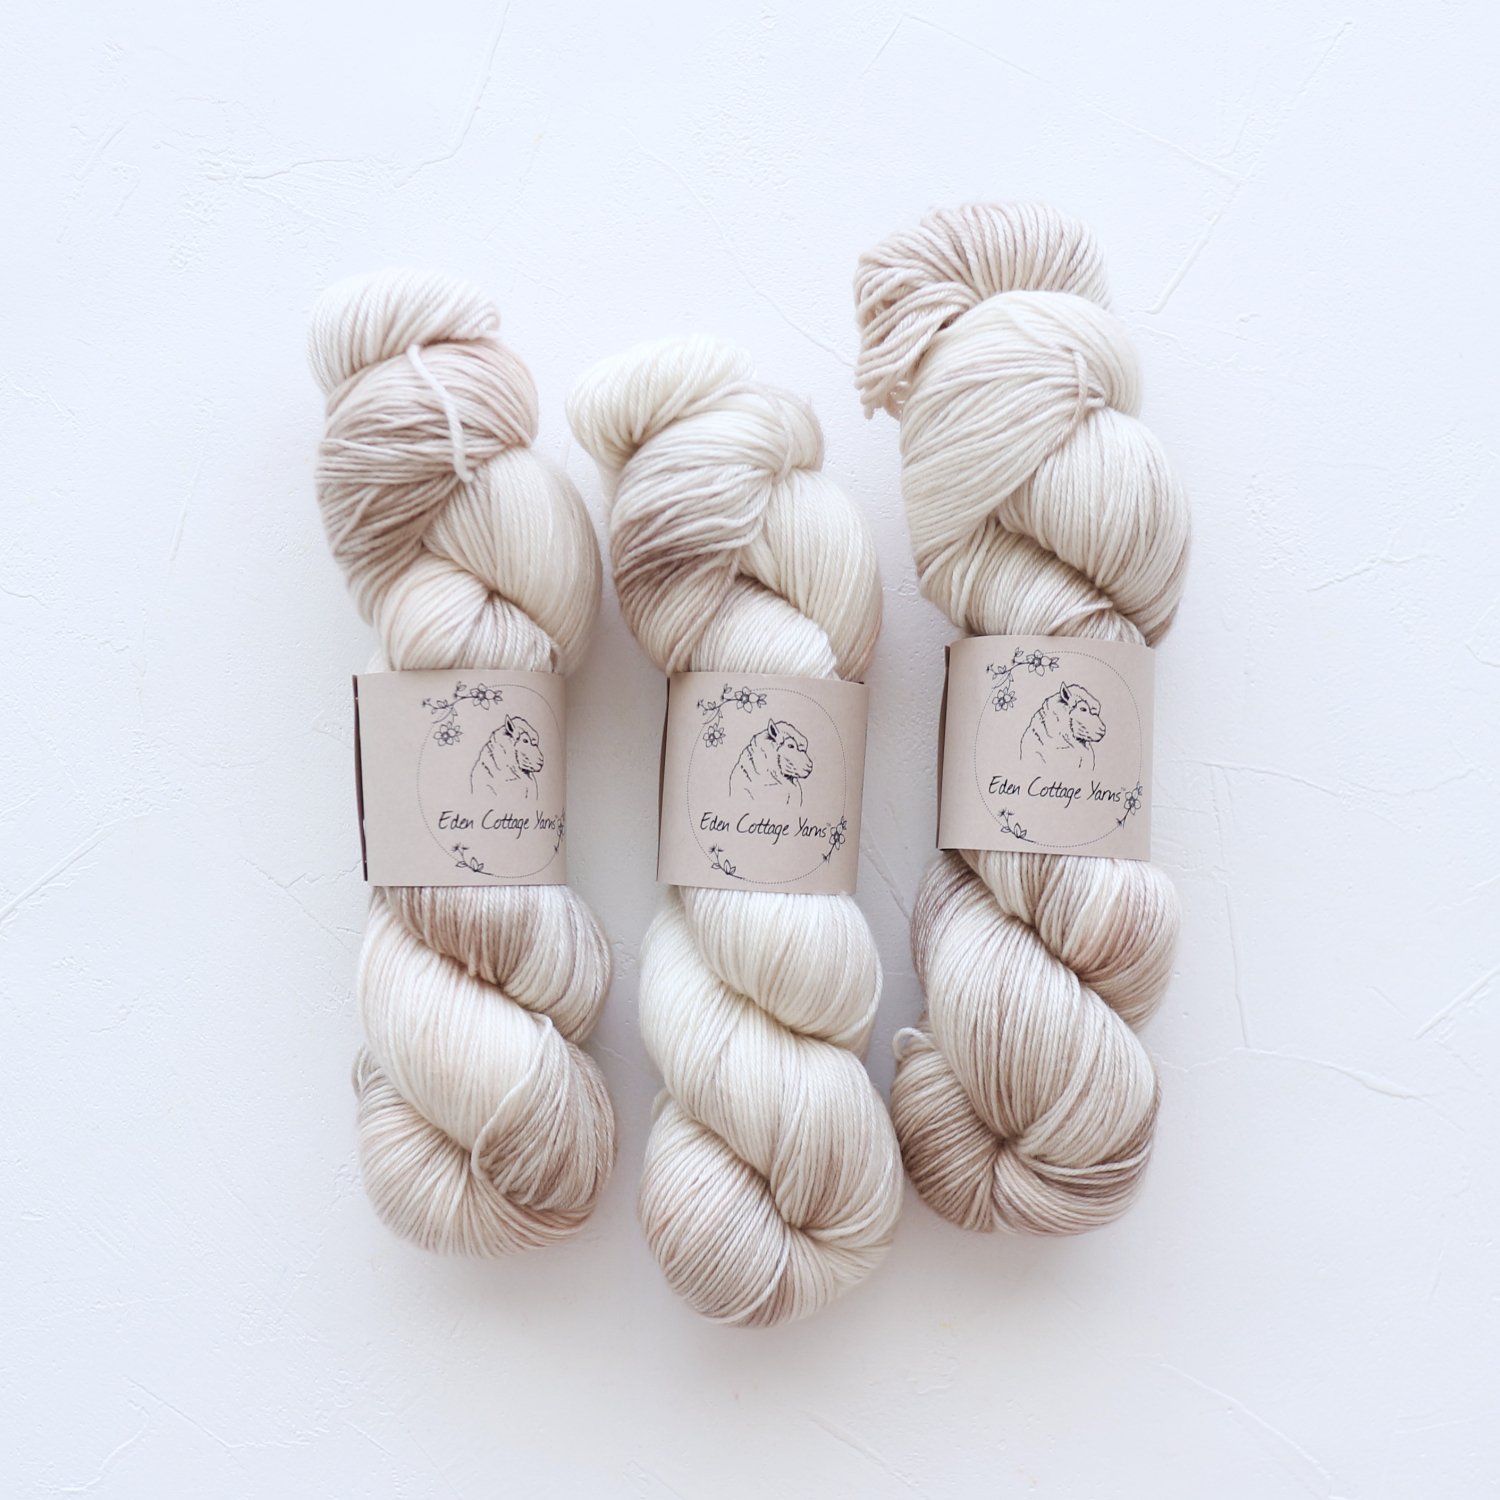 Eden Cottage Yarns<br>Pendle 4ply<br>Hot Choc